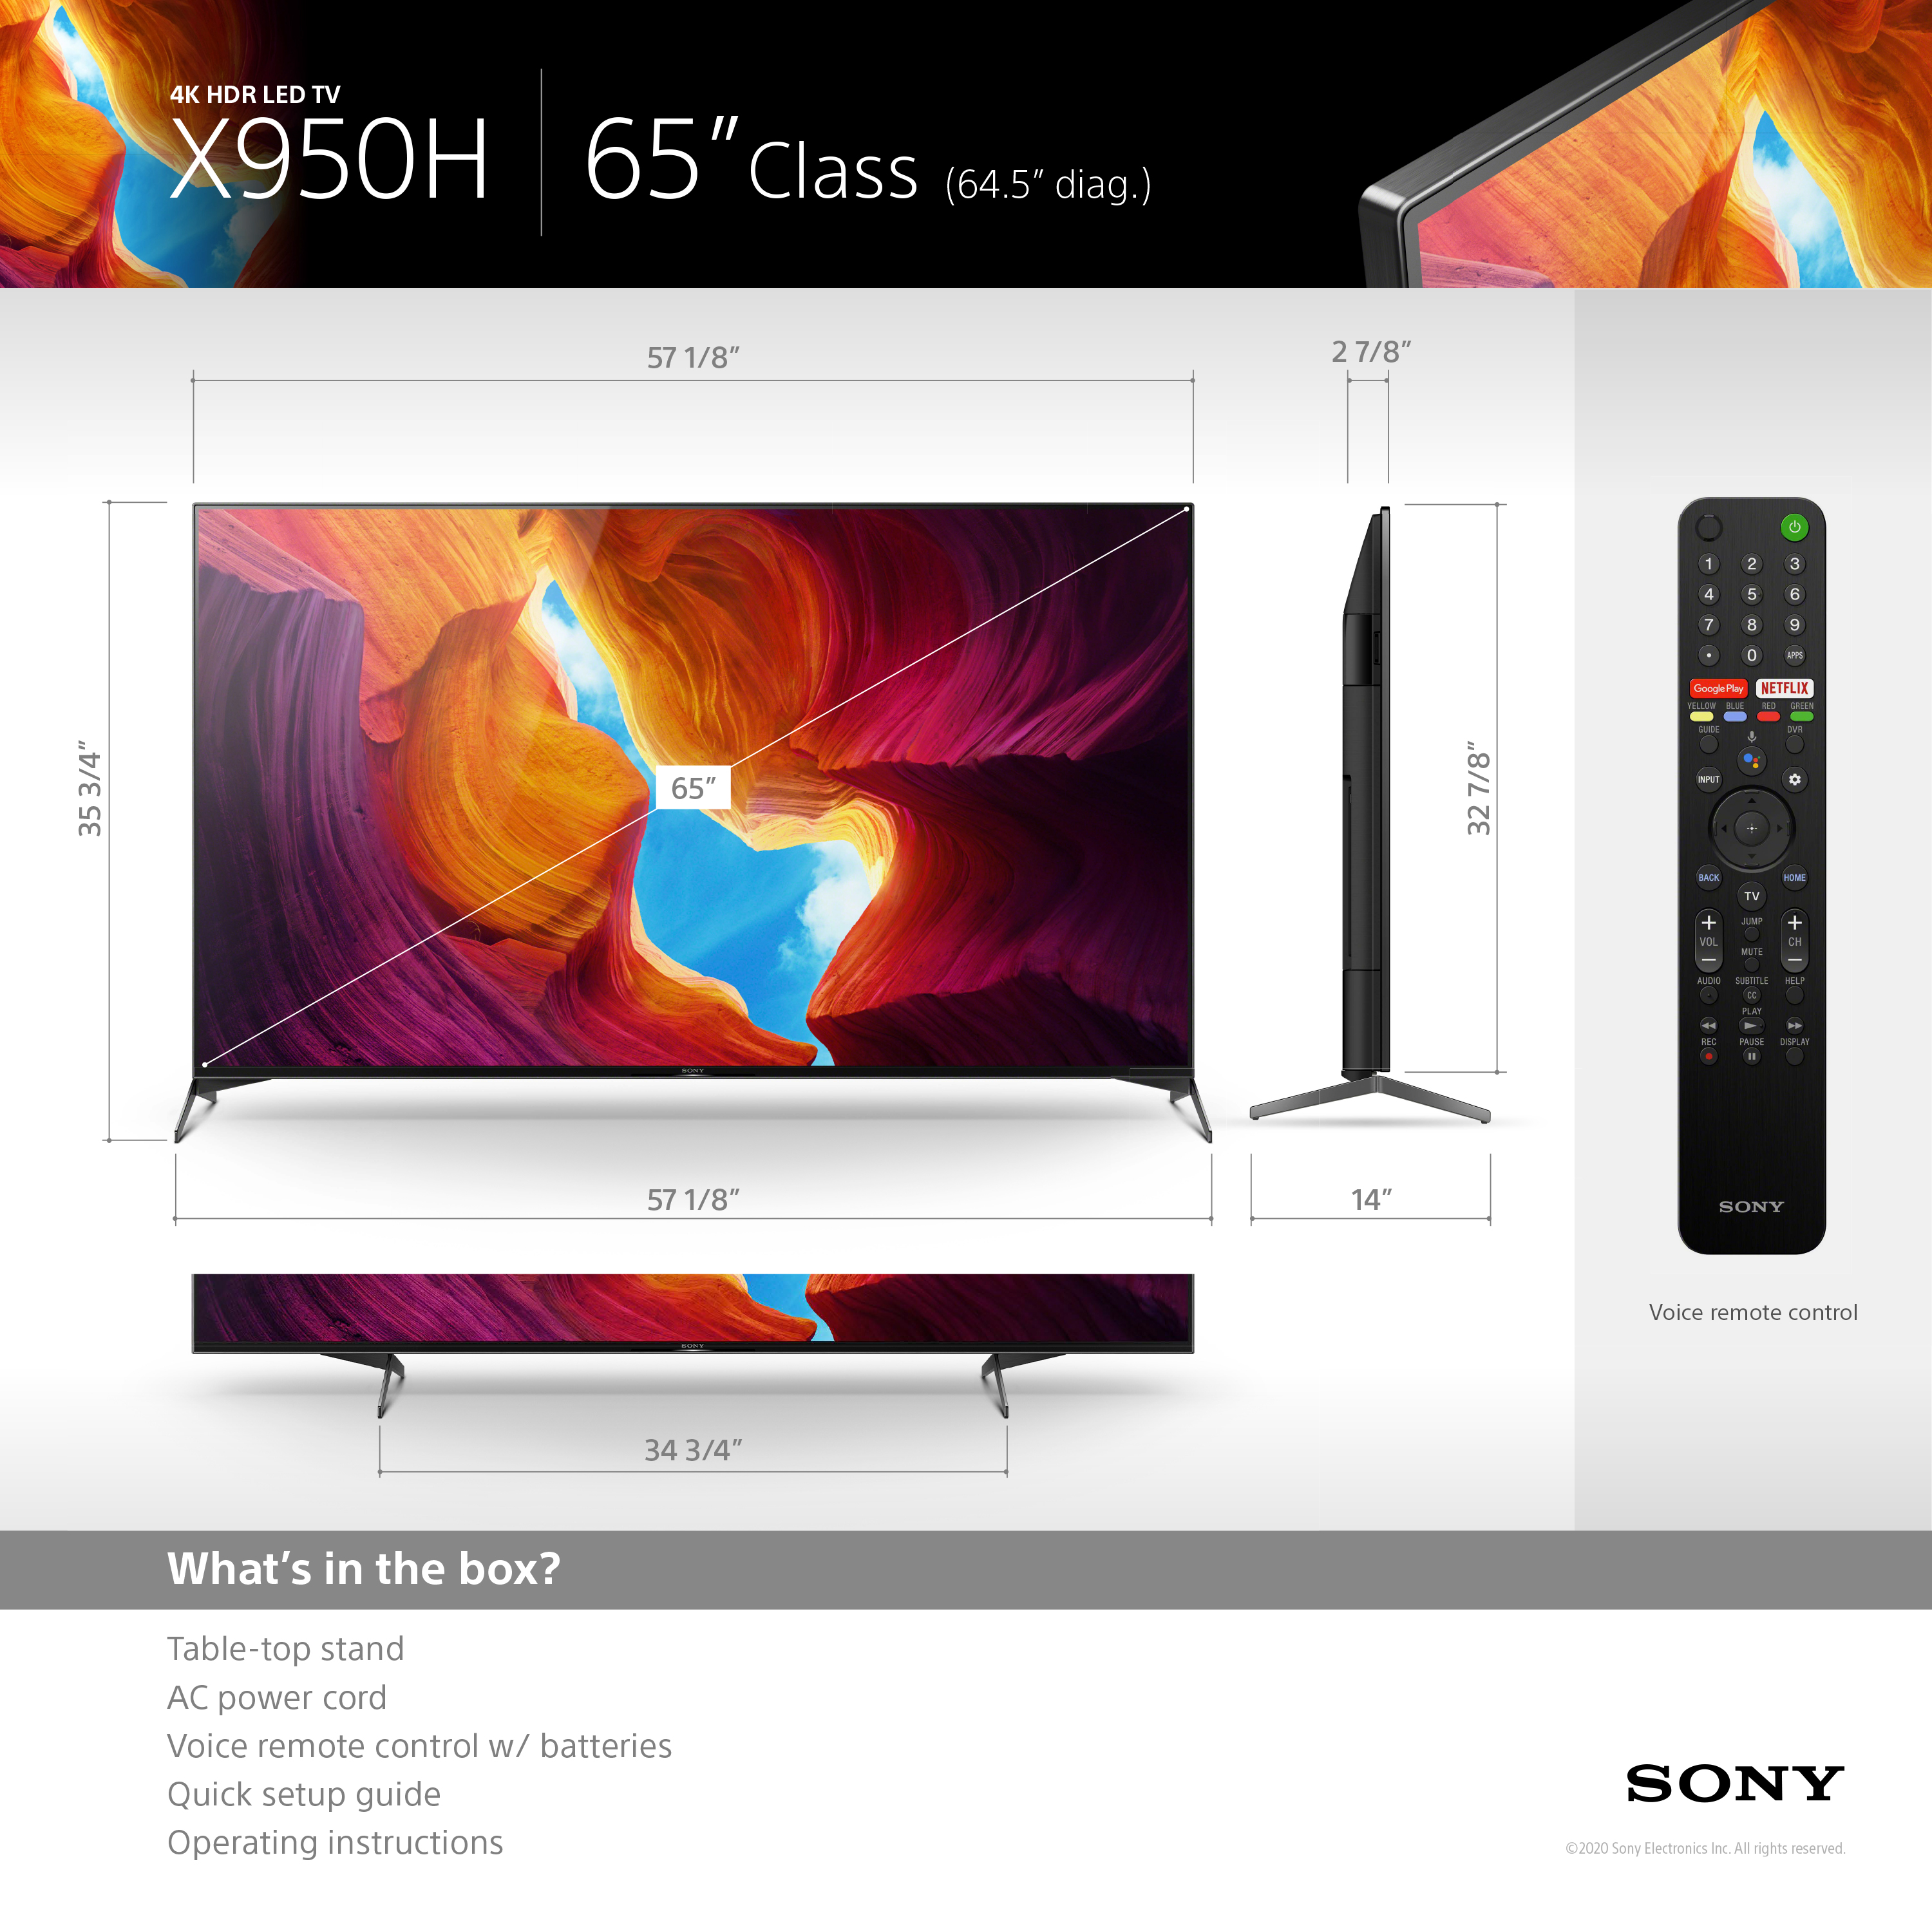 Sony 65" Class 4K Ultra HD (2160P) HDR Smart LED TV (XBR65X950H) - image 2 of 19